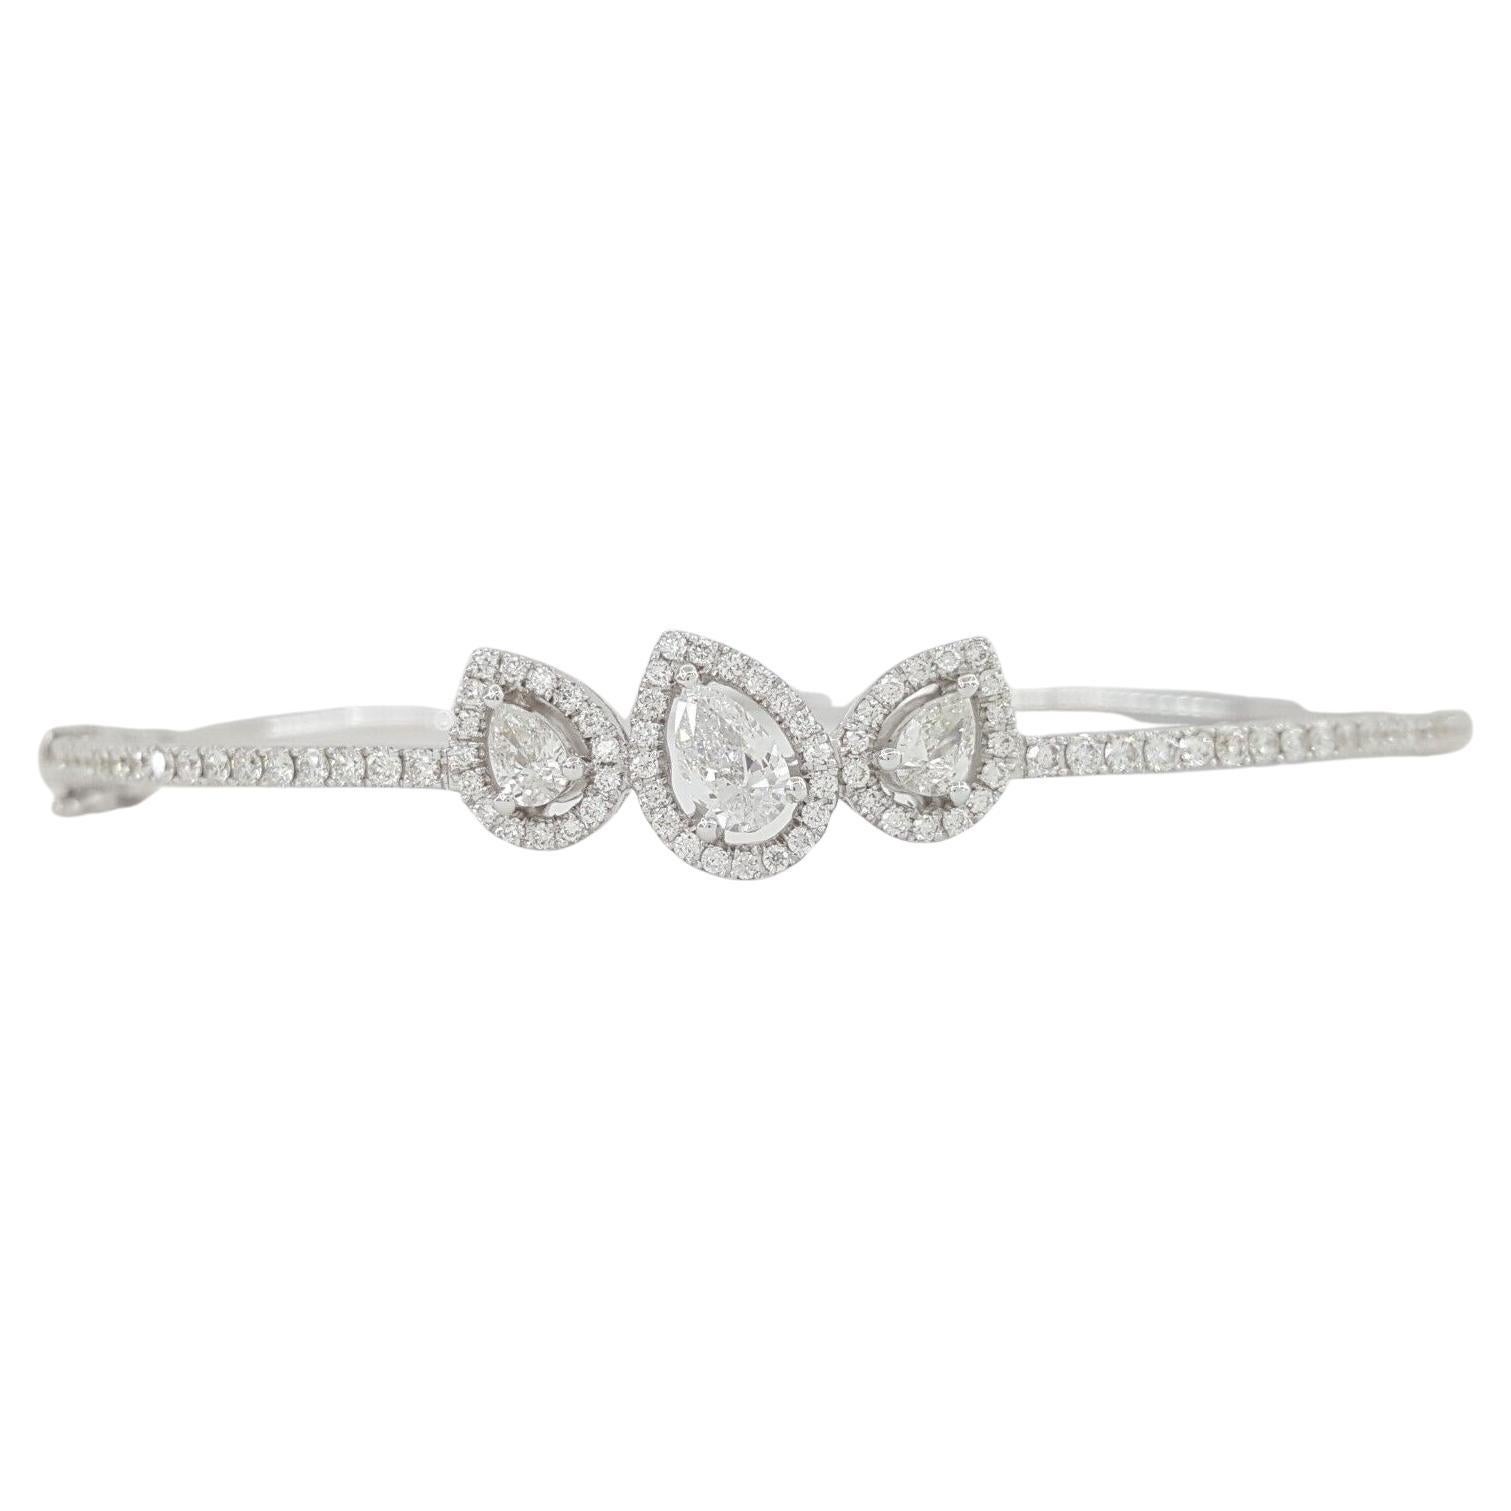 1.18 Pear Cut and Round Diamond Bangle 18 Carats White Gold Bracelet In Excellent Condition For Sale In Rome, IT